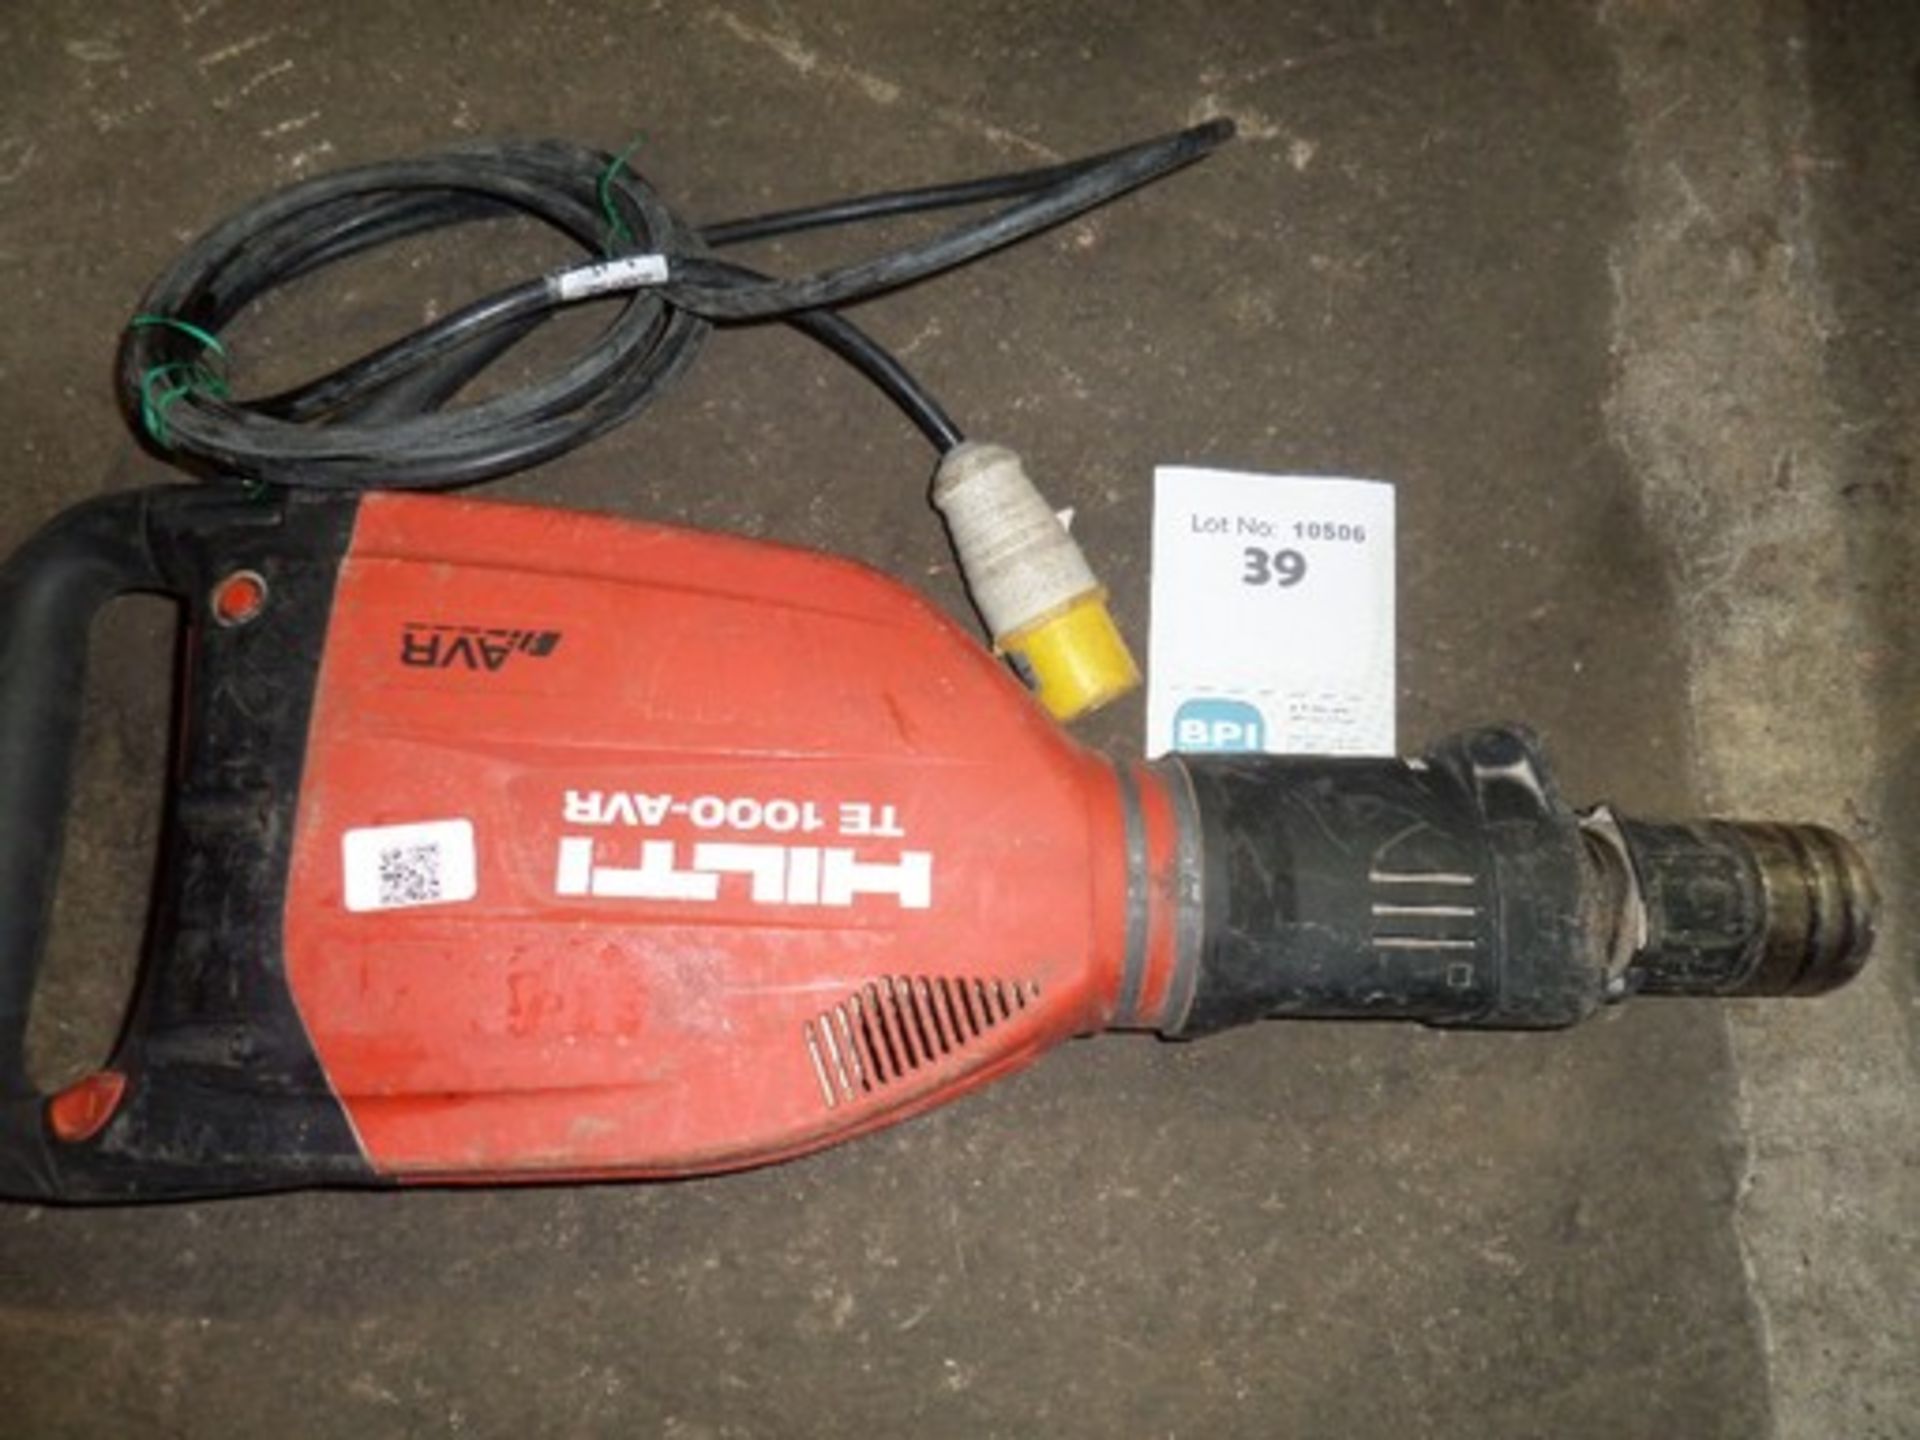 Hilti TE 1000 AVR {015170} BREAKER-  VIBRATION-DAMPED-  110V 110v 16amp connection and appears to be